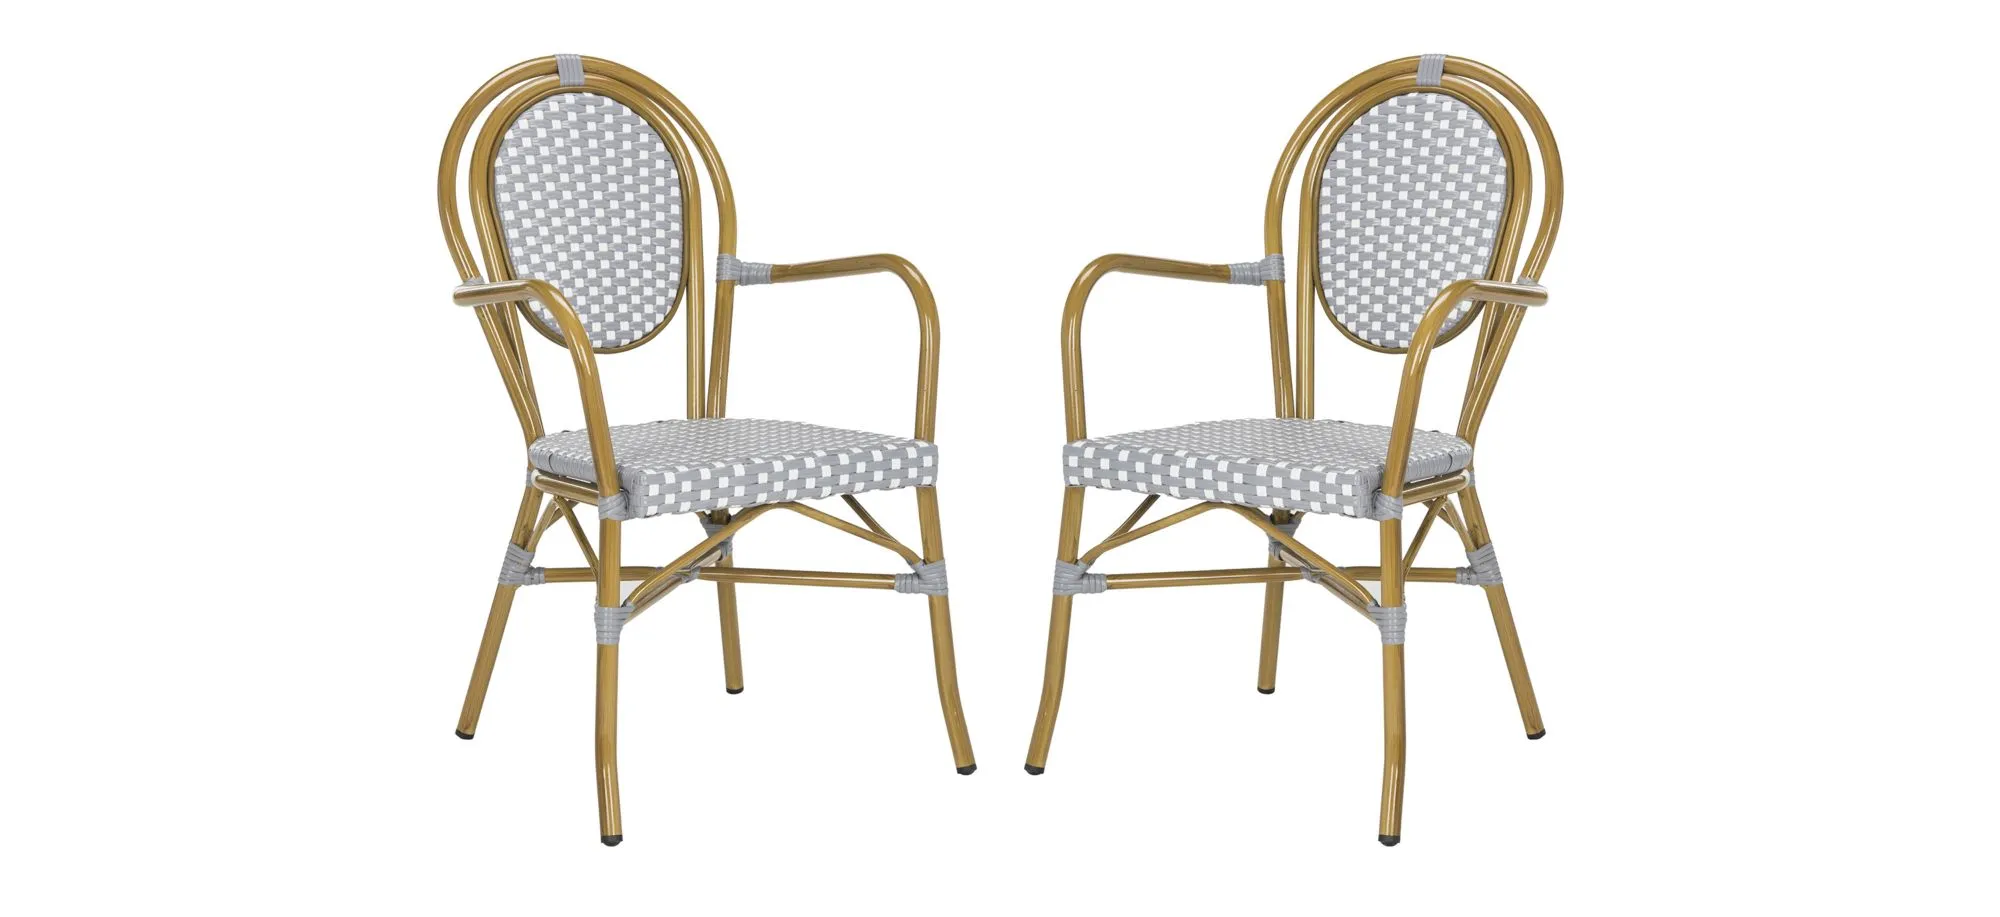 Casella Outdoor Arm Chair - Set of 2 in Pearl by Safavieh